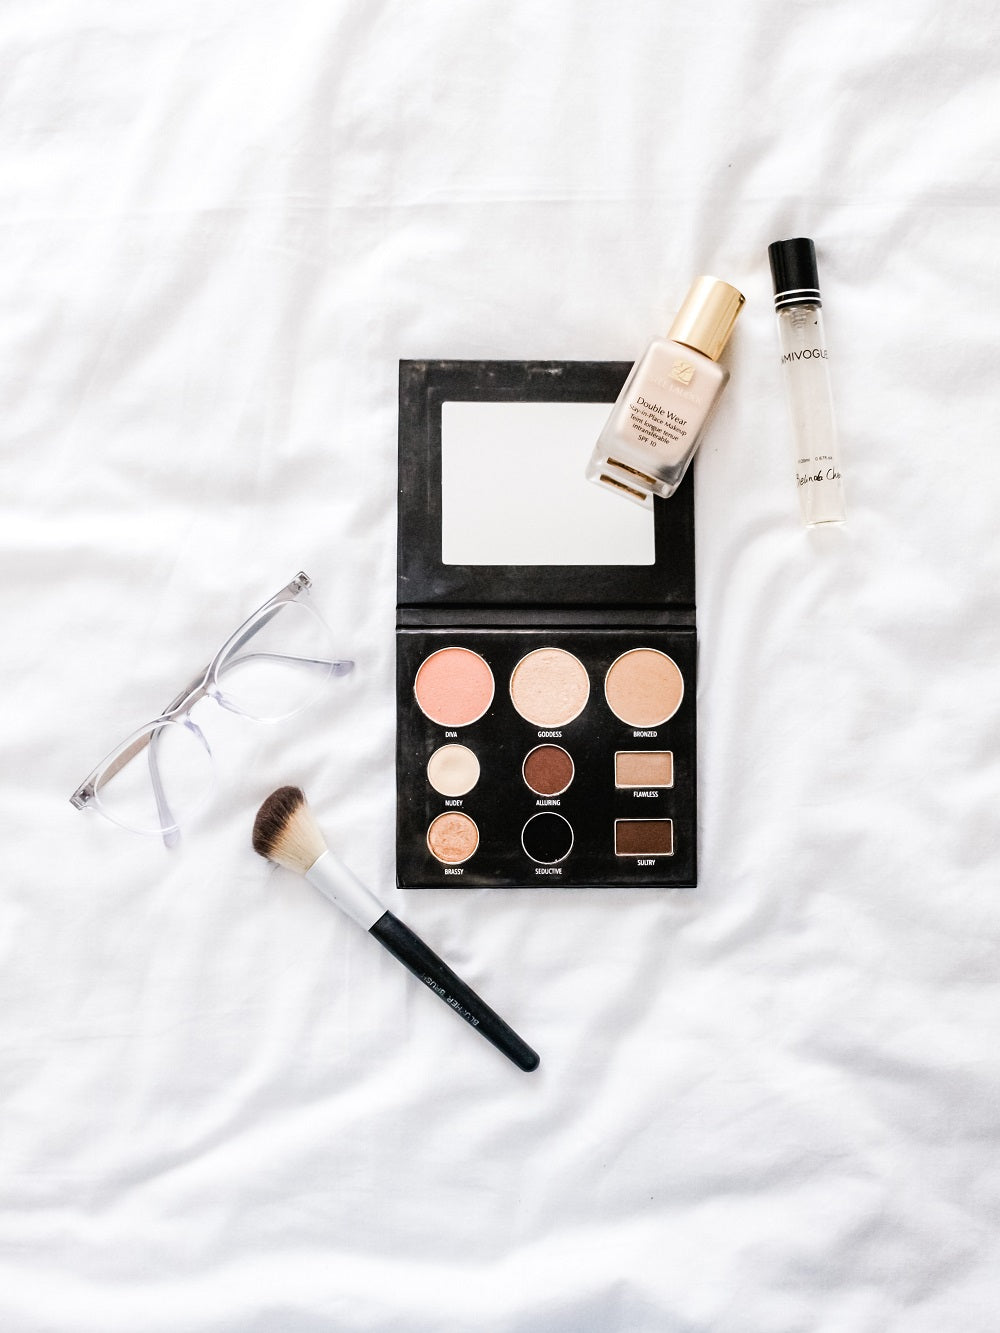 How to Save Money on Makeup – 10 Tips You Need To Know